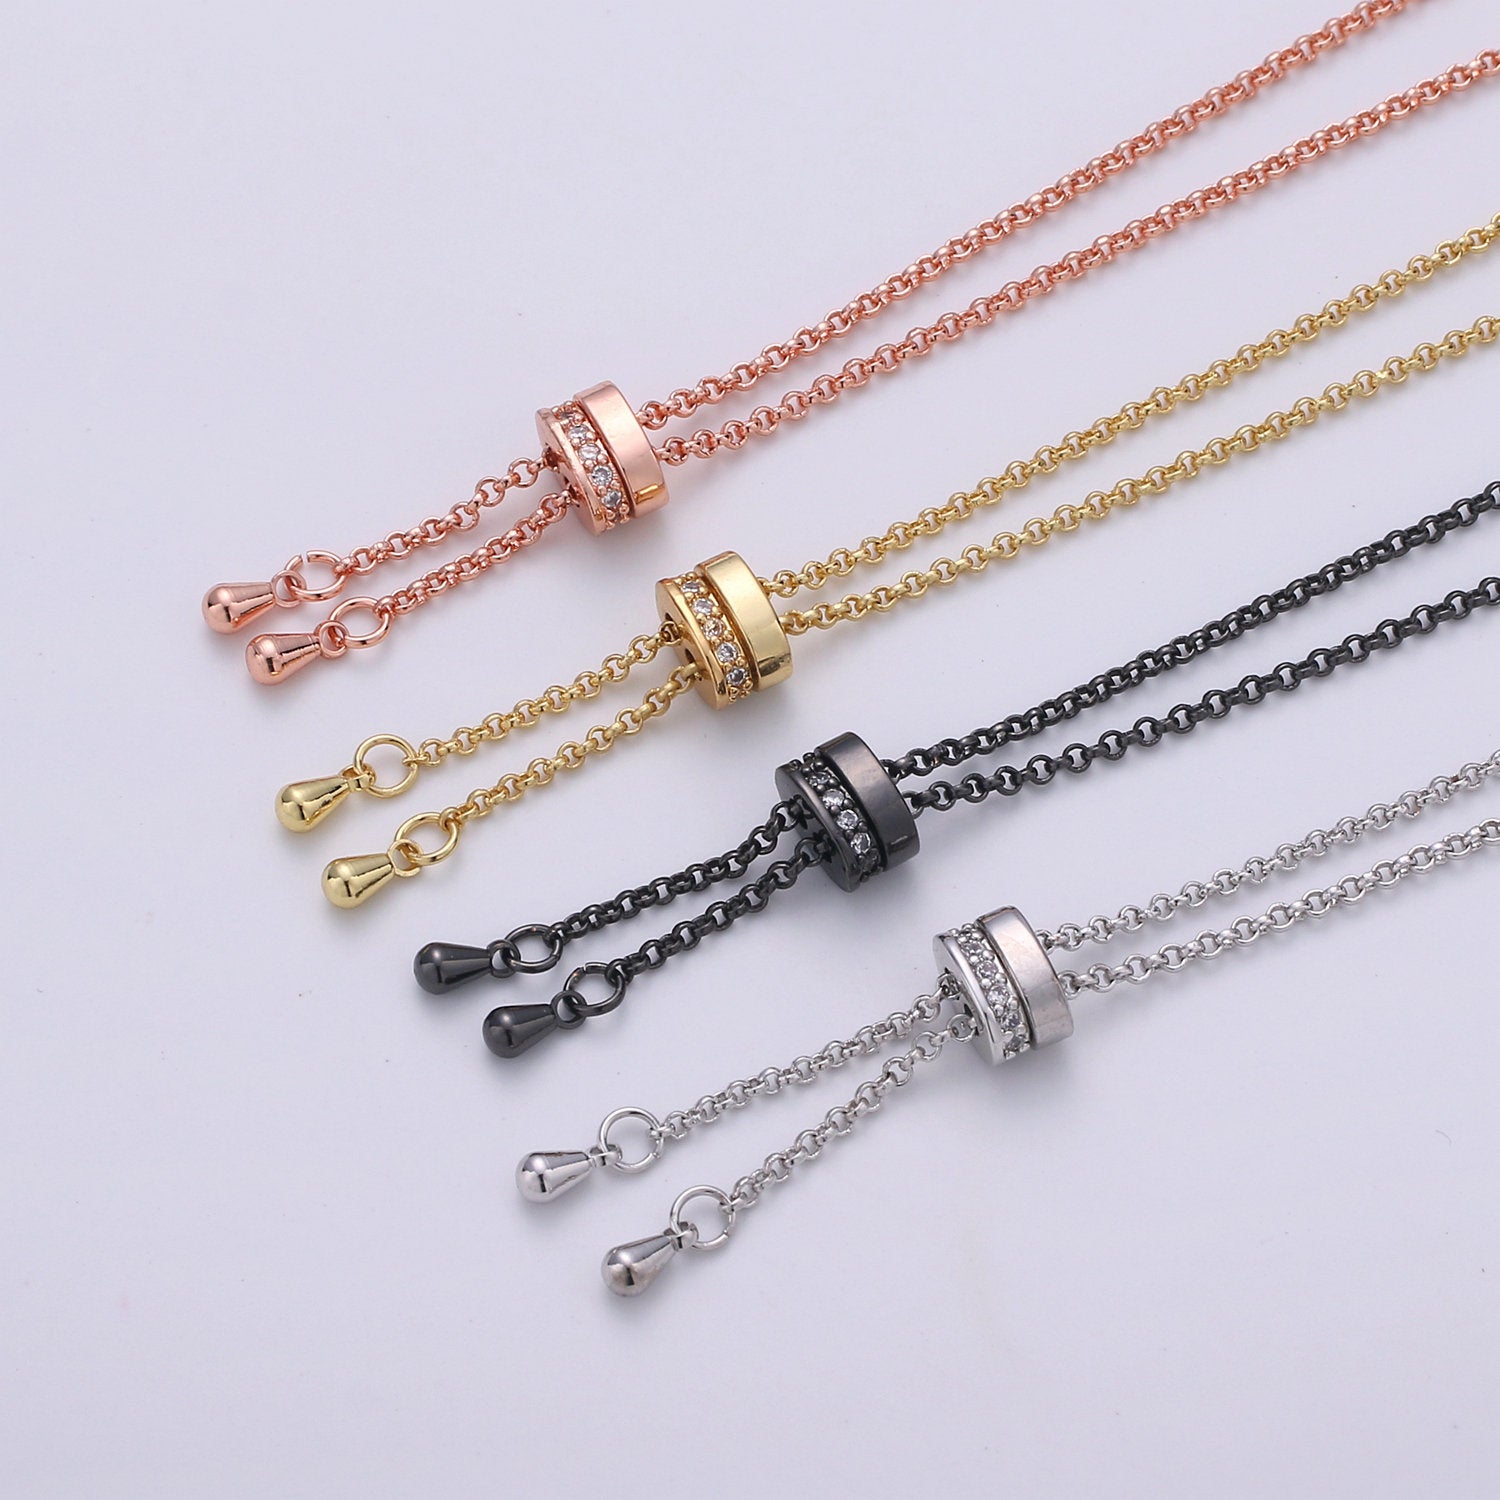 14k Gold Filled Adjustable Necklace Half finished Chain Necklace with rubber stopper Rose Gold, Silver, Black Rolo Chain Wholesale 1pc/10pcs - DLUXCA